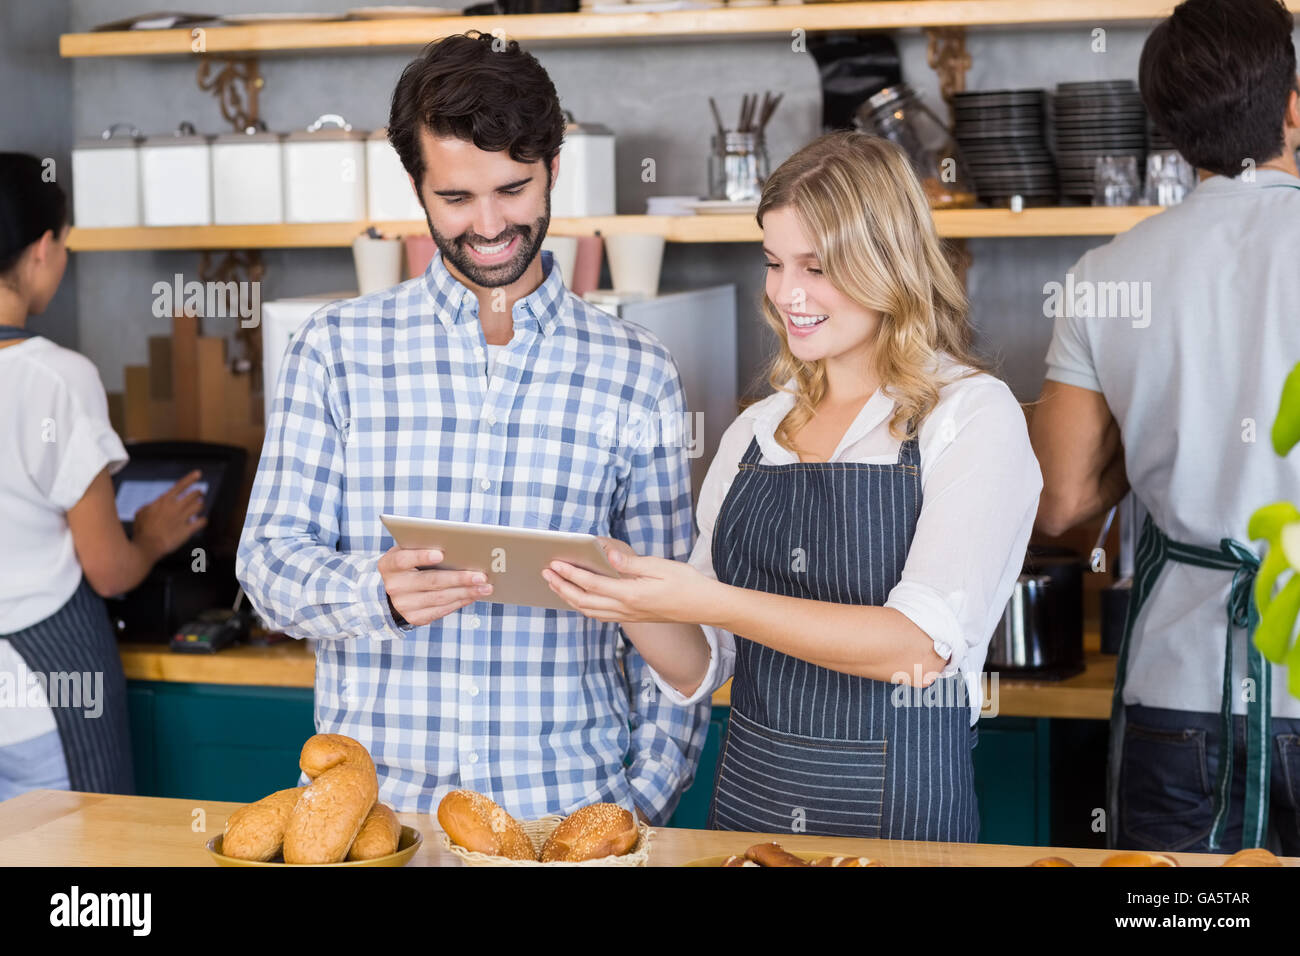 Man and waitress standing at counter using digital tablet Stock Photo